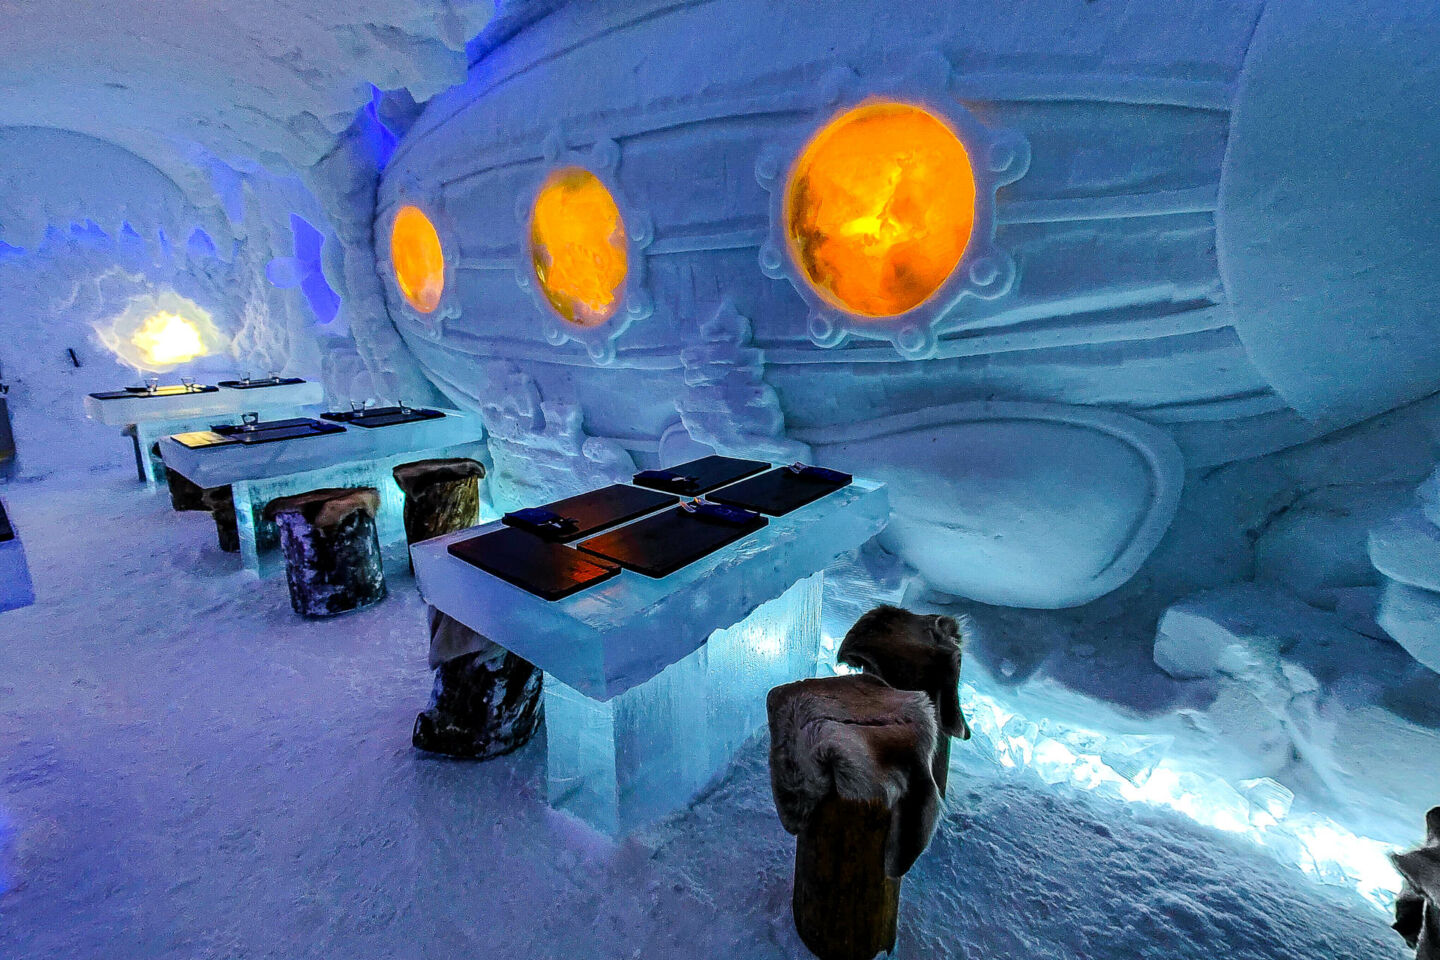 Restaurant made of ice and snow at Snowman World, a Finnish Lapland filming location